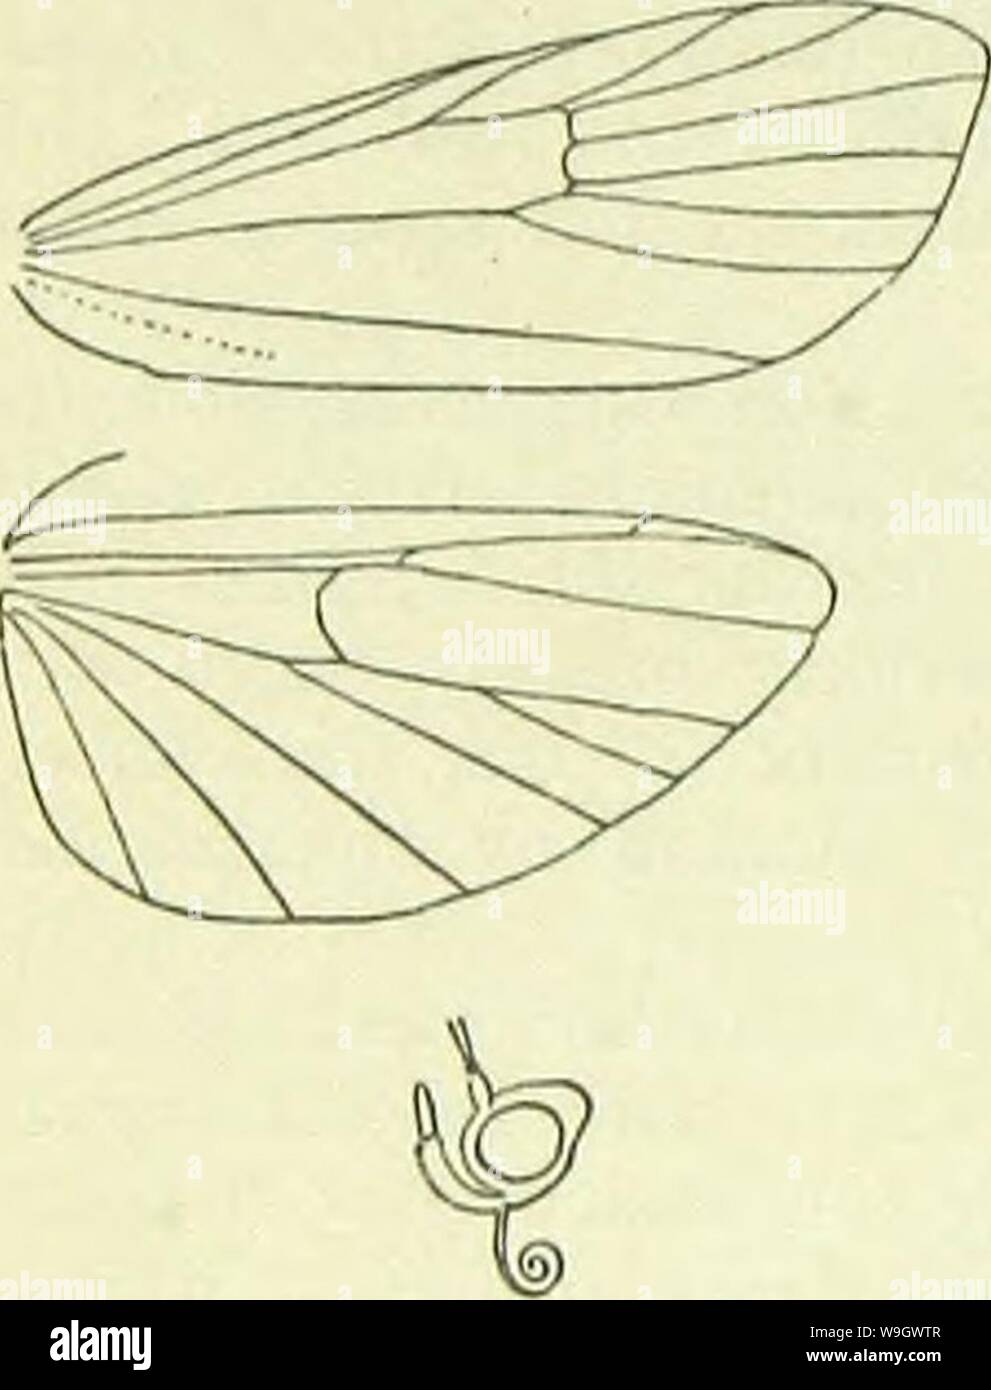 Archive image from page 381 of A handbook of British lepidoptera. A handbook of British lepidoptera  CUbiodiversity1126142 Year: 1895 ( 372 PYRALIDINA rPLOnu Only one species is known; its habits are similar to those of Ephestia. Imago with forewings narrow, costa hardly arched. 1. P. interpunctella, Mb. 13-18 mm. Forewings ferrugin- ous-ochreous, densely mixed with dark fuscous; basal area wholly whitish-ochreous; first and second lines obscurely dark leaden - fuscous; an obscure paler discal dot. Hindwings whitish-fuscous. England to Westmoreland, N. and E. Ireland, local; SC. and S. Europe, Stock Photo